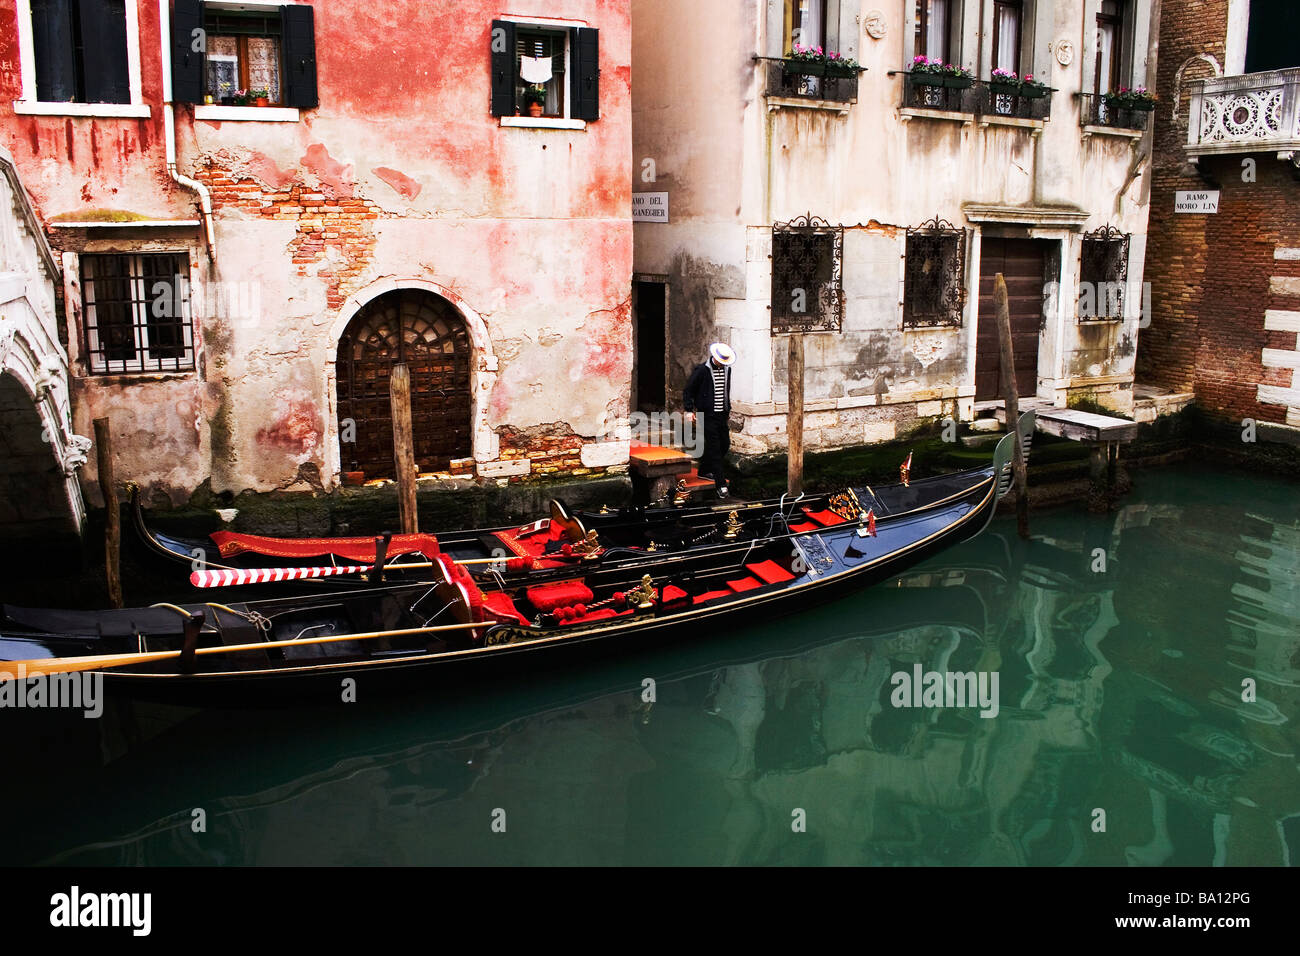 Venetian gondola and gondolier on small back-street canal with old, flaking, rustic buildings Venice Italy Stock Photo